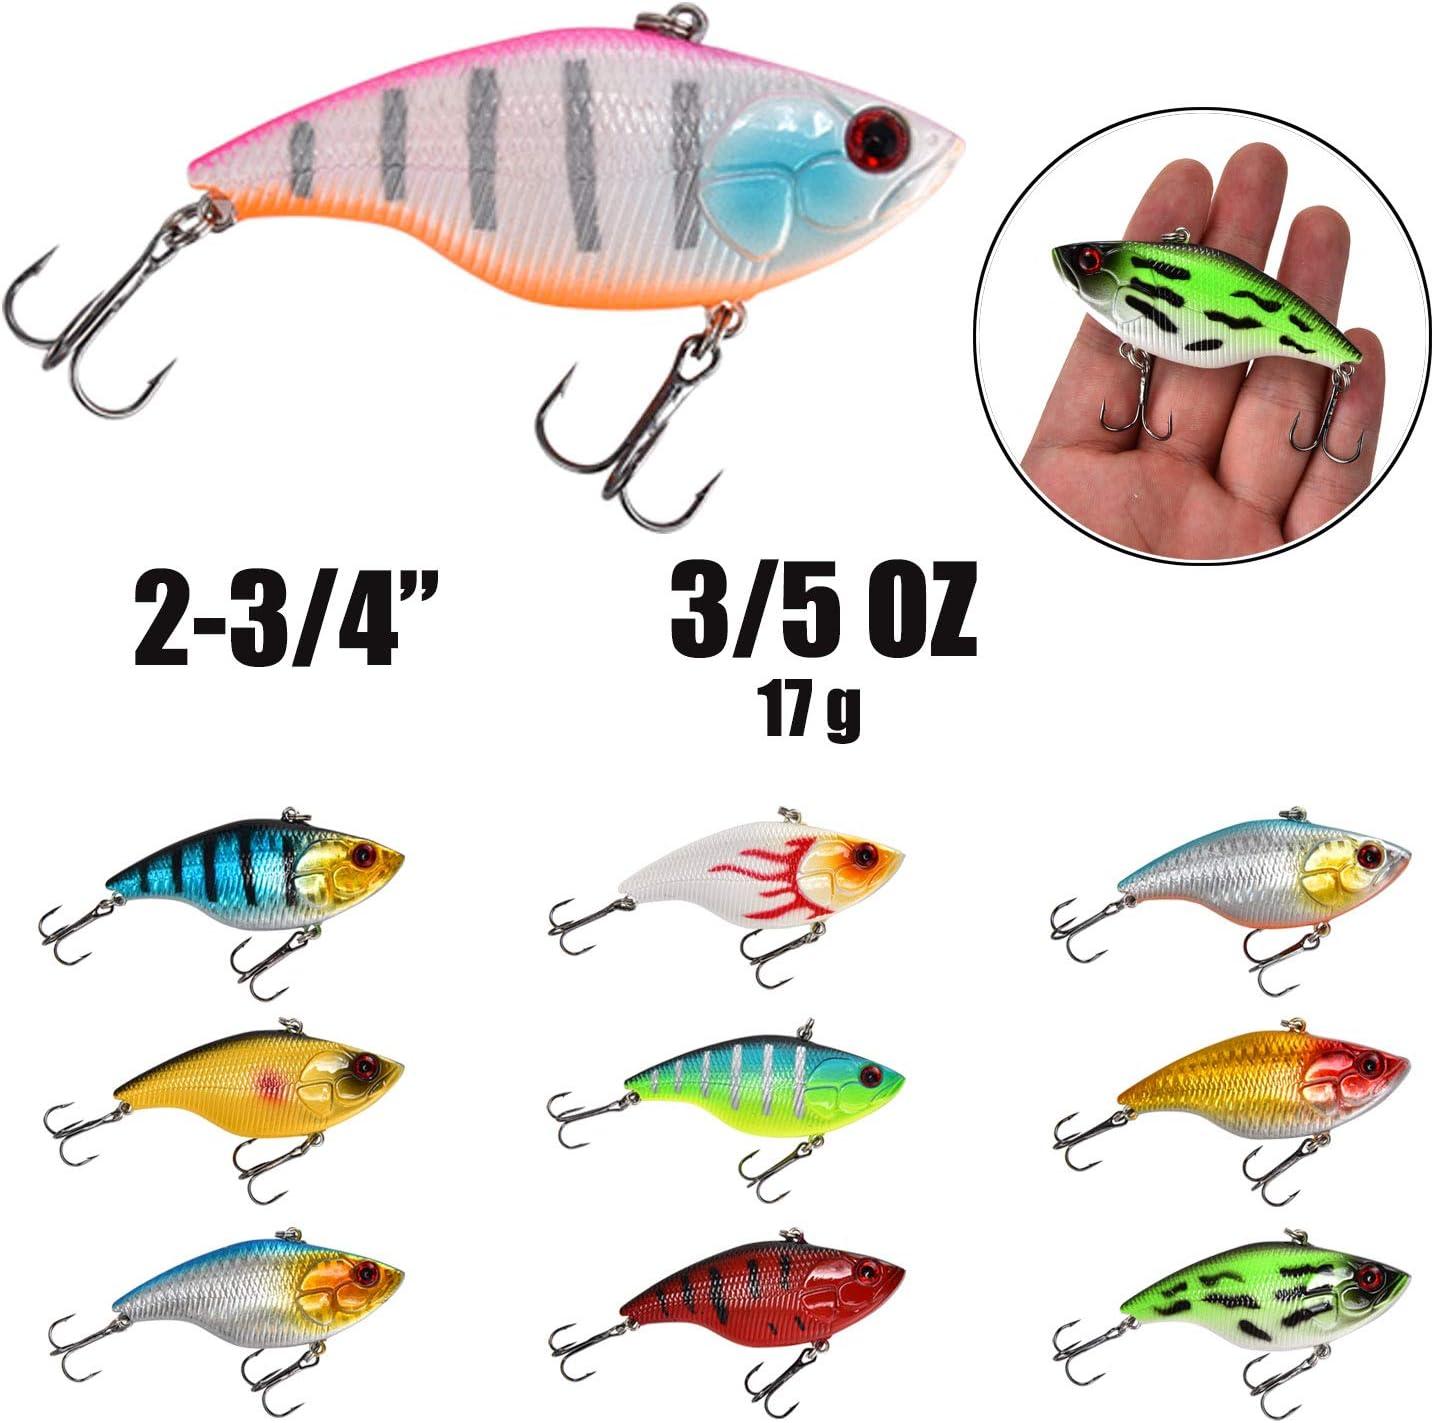 NOBONDO 10 PCS Lipless Crankbait Fishing Lures for Saltwater Freshwater  with Portable Bag - 3/5 OZ VIB Lures with 3D Eyes, Sinking Vibe Crank Baits  Swimbaits Minnow for Bass Trout Catfish Pike Walleye